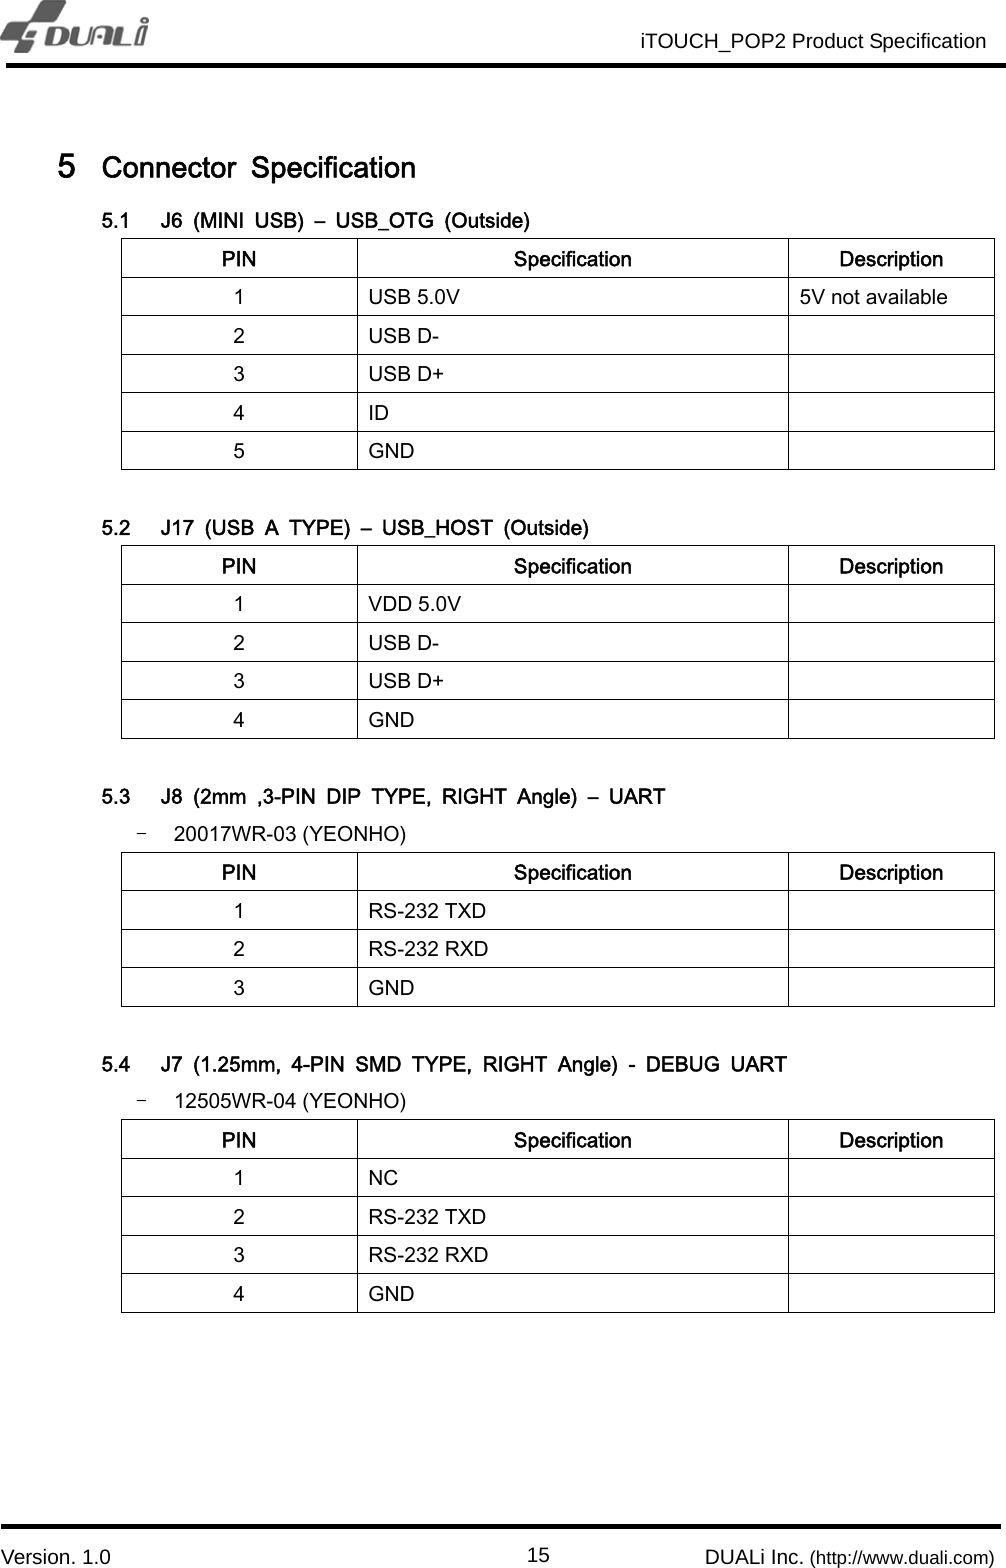                                                          iTOUCH_POP2 Product Specification                          `  Version. 1.0                                                         DUALi Inc. (http://www.duali.com)  155 Connector  Specification 5.1 J6  (MINI  USB)  –  USB_OTG  (Outside) PIN  Specification  Description 1  USB 5.0V  5V not available 2  USB D-  3  USB D+   4  ID   5  GND    5.2 J17  (USB  A  TYPE)  –  USB_HOST  (Outside) PIN  Specification  Description 1  VDD 5.0V   2  USB D-  3  USB D+   4  GND    5.3 J8 (2mm ,3-PIN DIP TYPE, RIGHT Angle) – UART - 20017WR-03 (YEONHO) PIN  Specification  Description 1  RS-232 TXD   2  RS-232 RXD   3  GND    5.4 J7 (1.25mm, 4-PIN SMD TYPE, RIGHT Angle) - DEBUG UART - 12505WR-04 (YEONHO) PIN  Specification  Description 1  NC   2  RS-232 TXD   3  RS-232 RXD   4  GND        